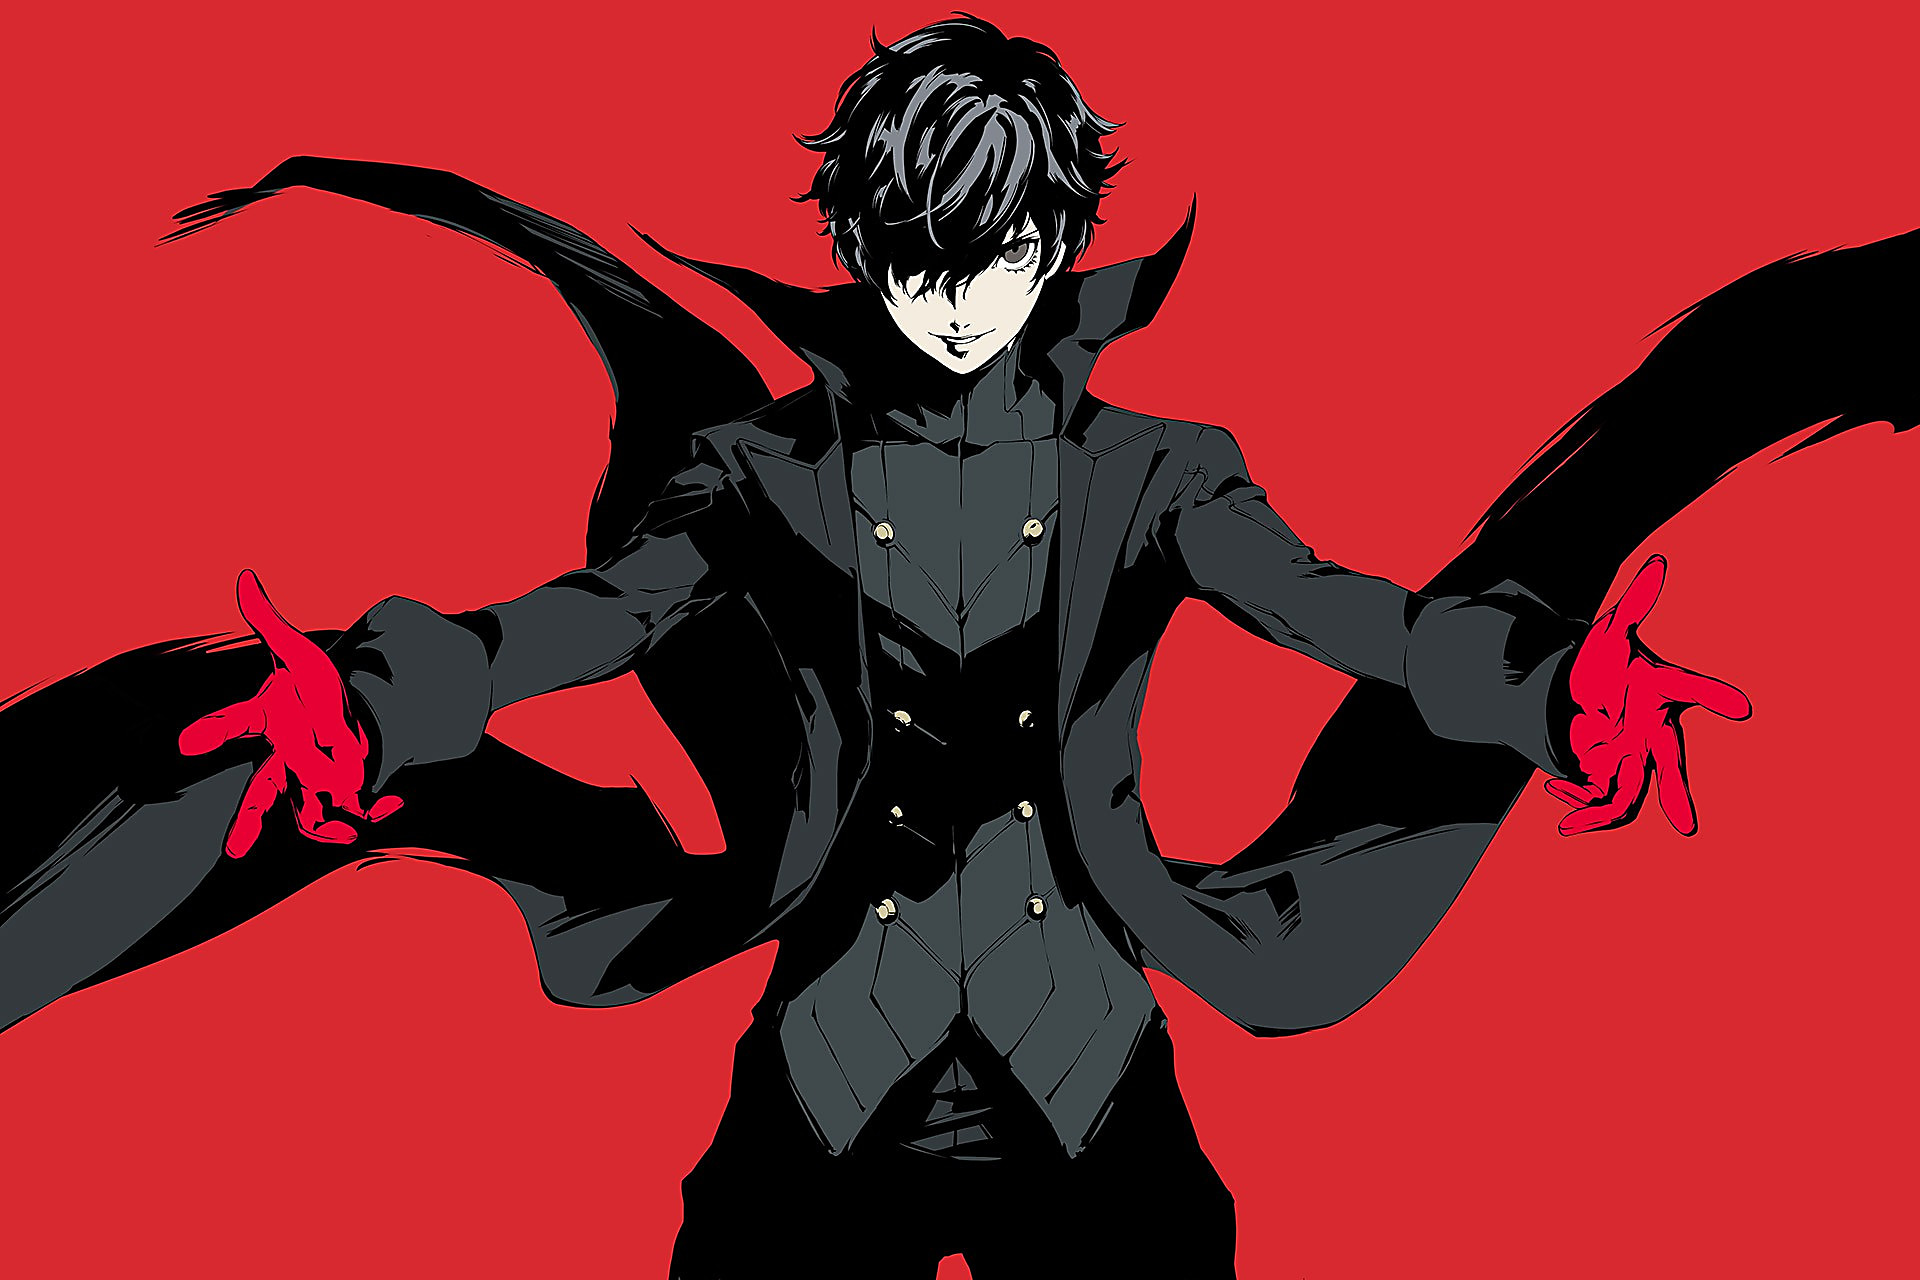 Madness Combat Fits The Persona Artstyle Pretty Well R Madnesscombat